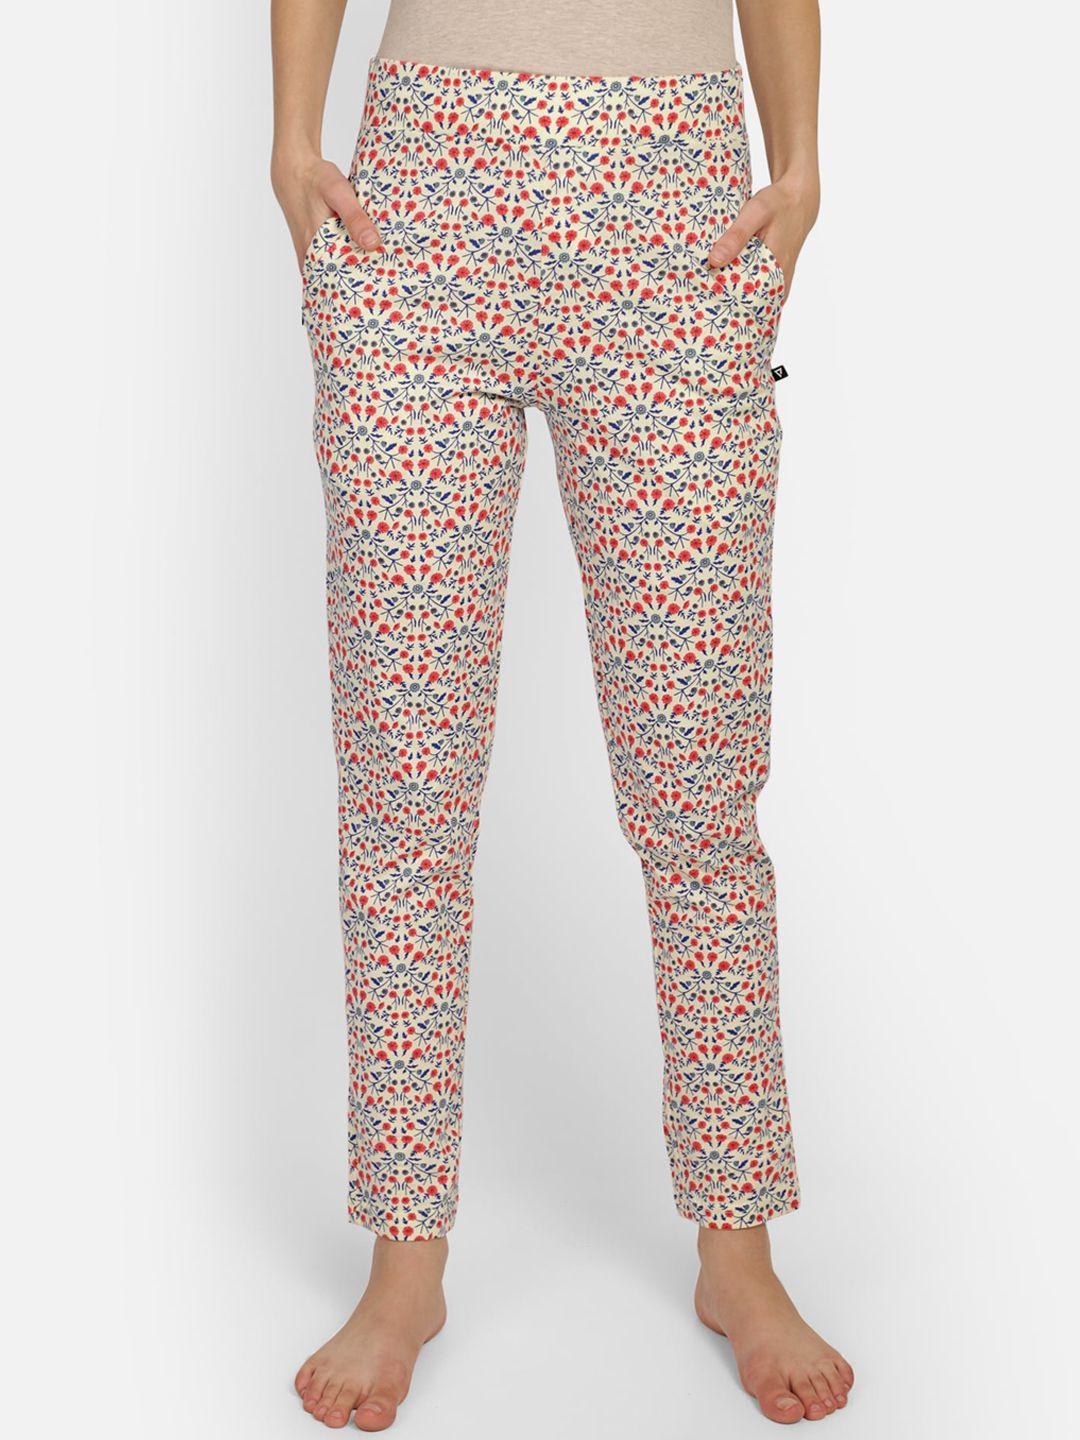 proteens-women-multicolored-micro-floral-print-lounge-pants